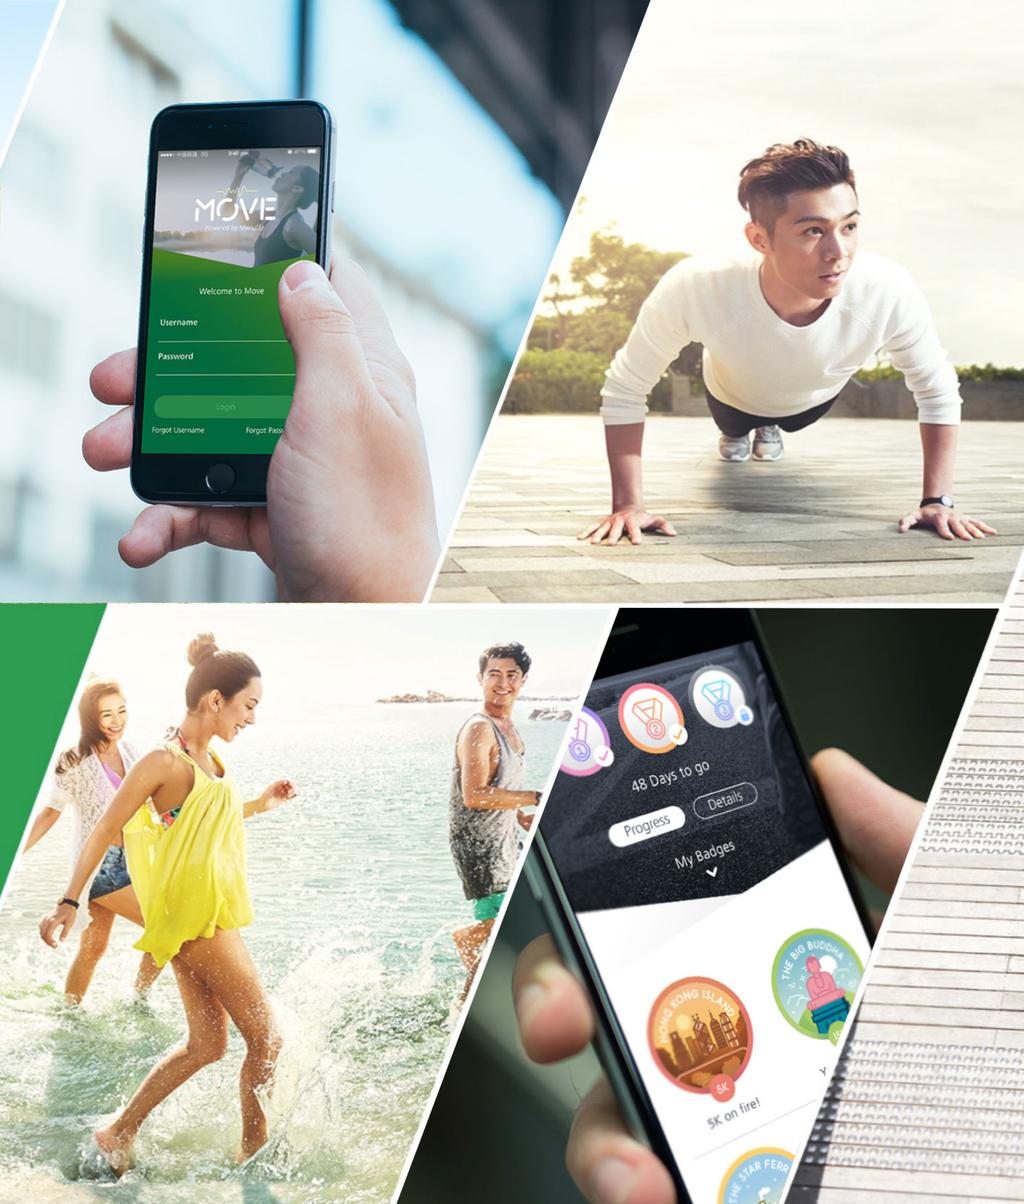 ManulifeMOVE rewards customers for leading healthy and active lifestyles Uplift in digital engagement